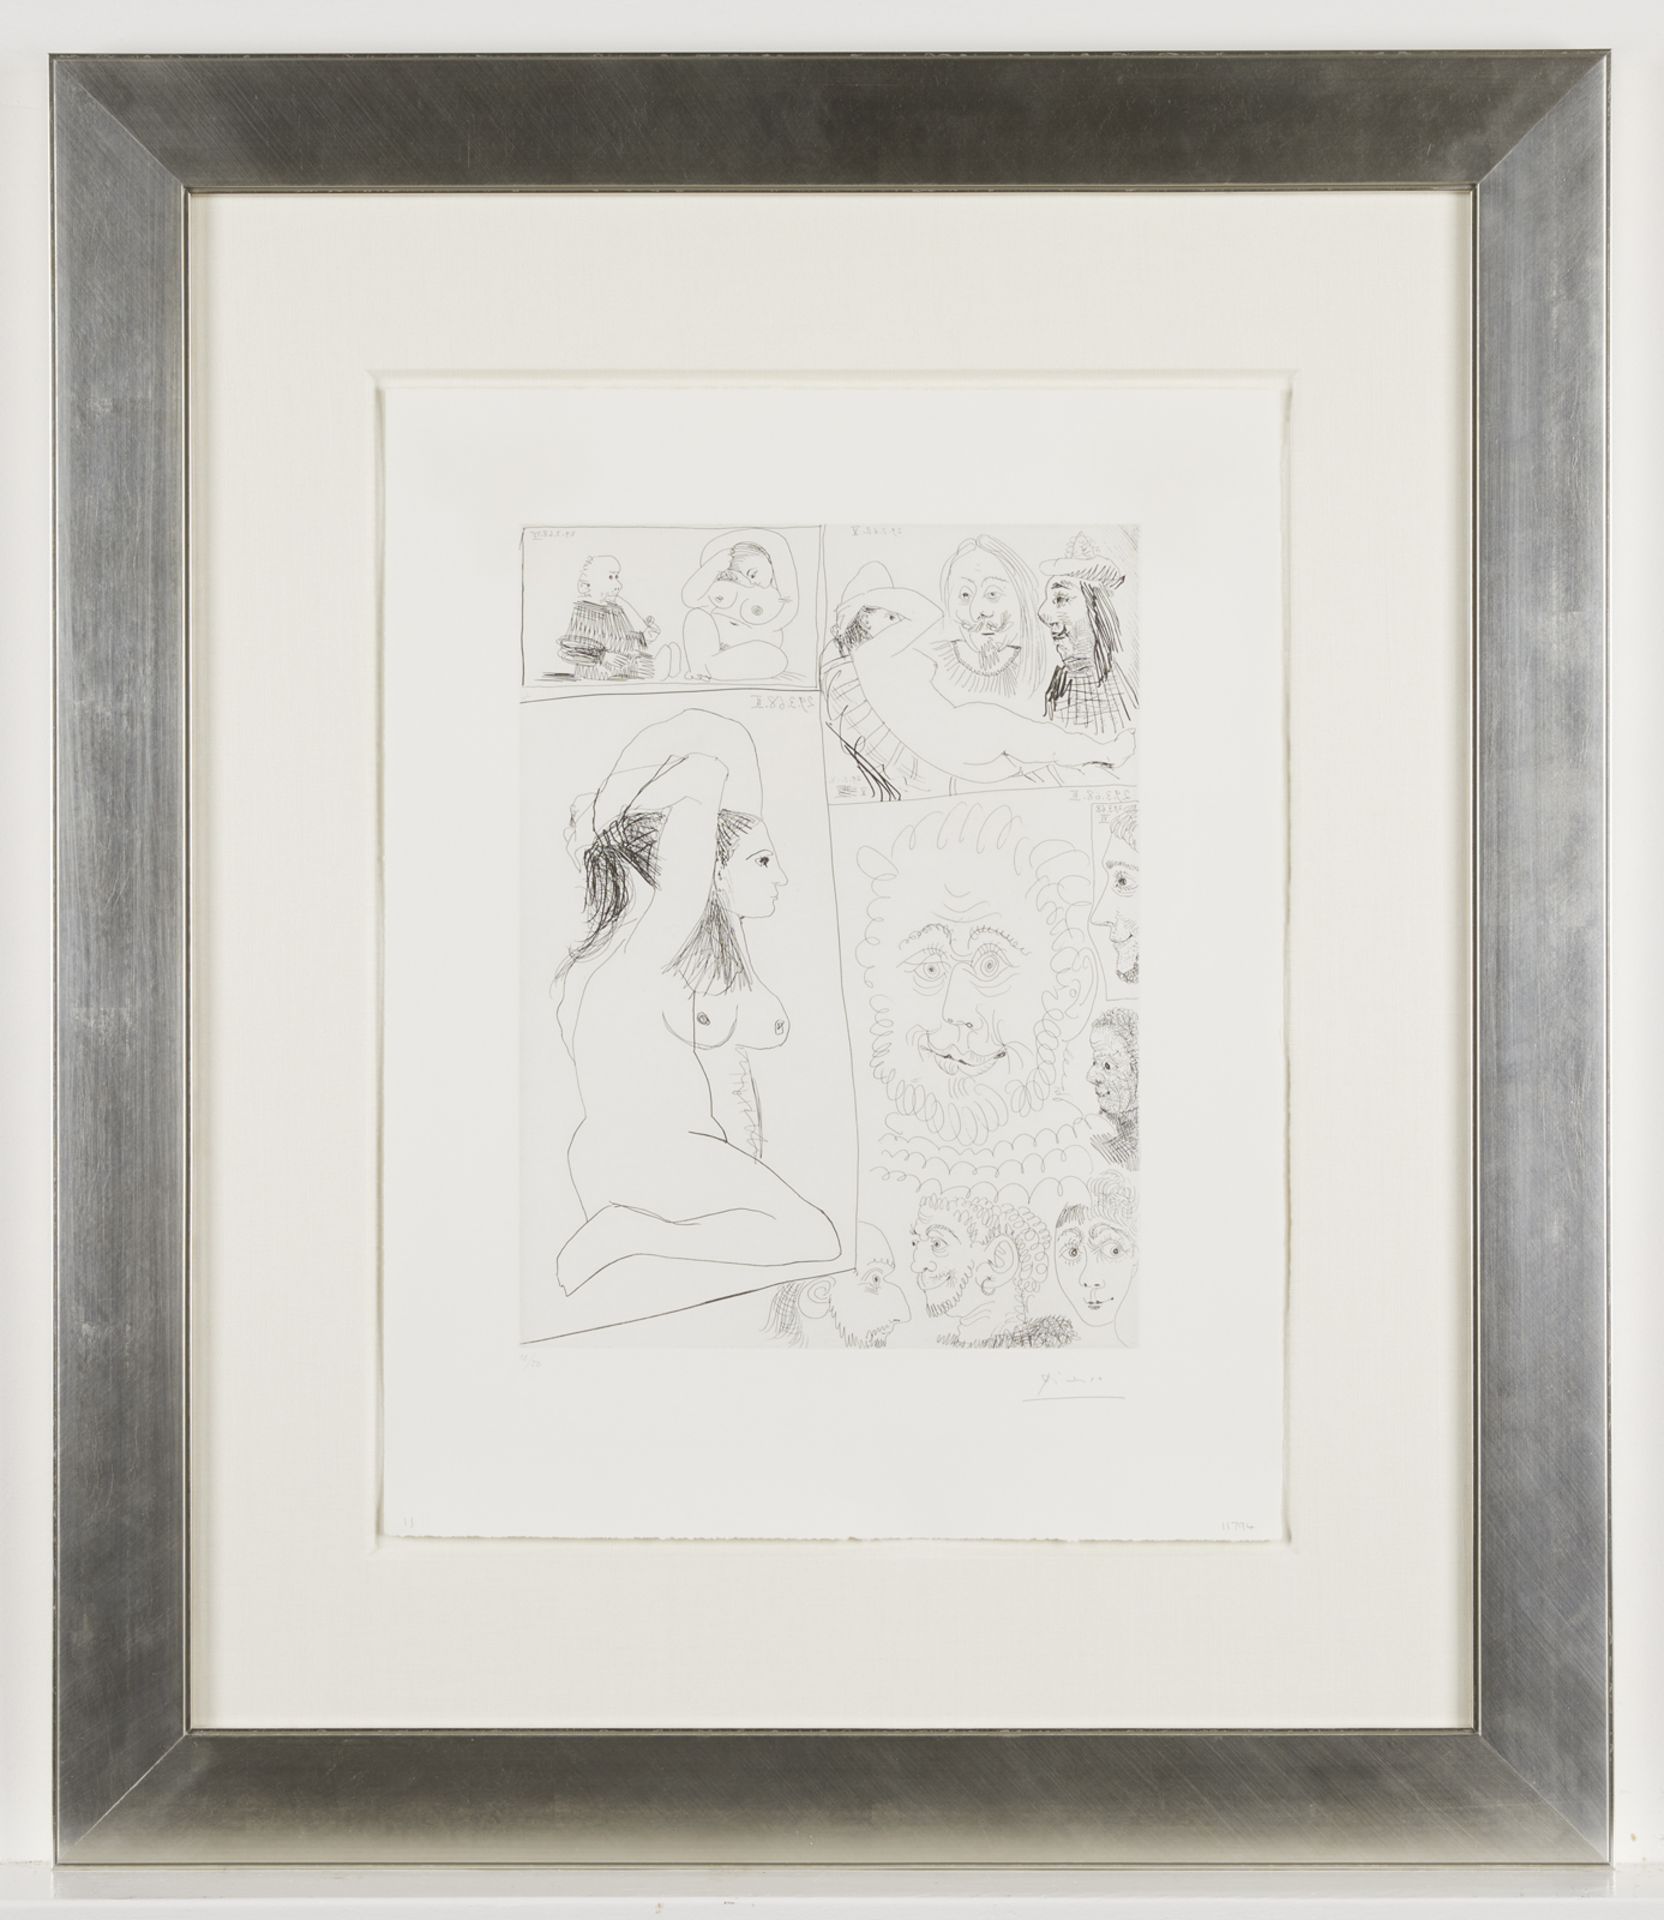 Picasso "Bande Dessinee" Etching 347 Series - Image 3 of 10